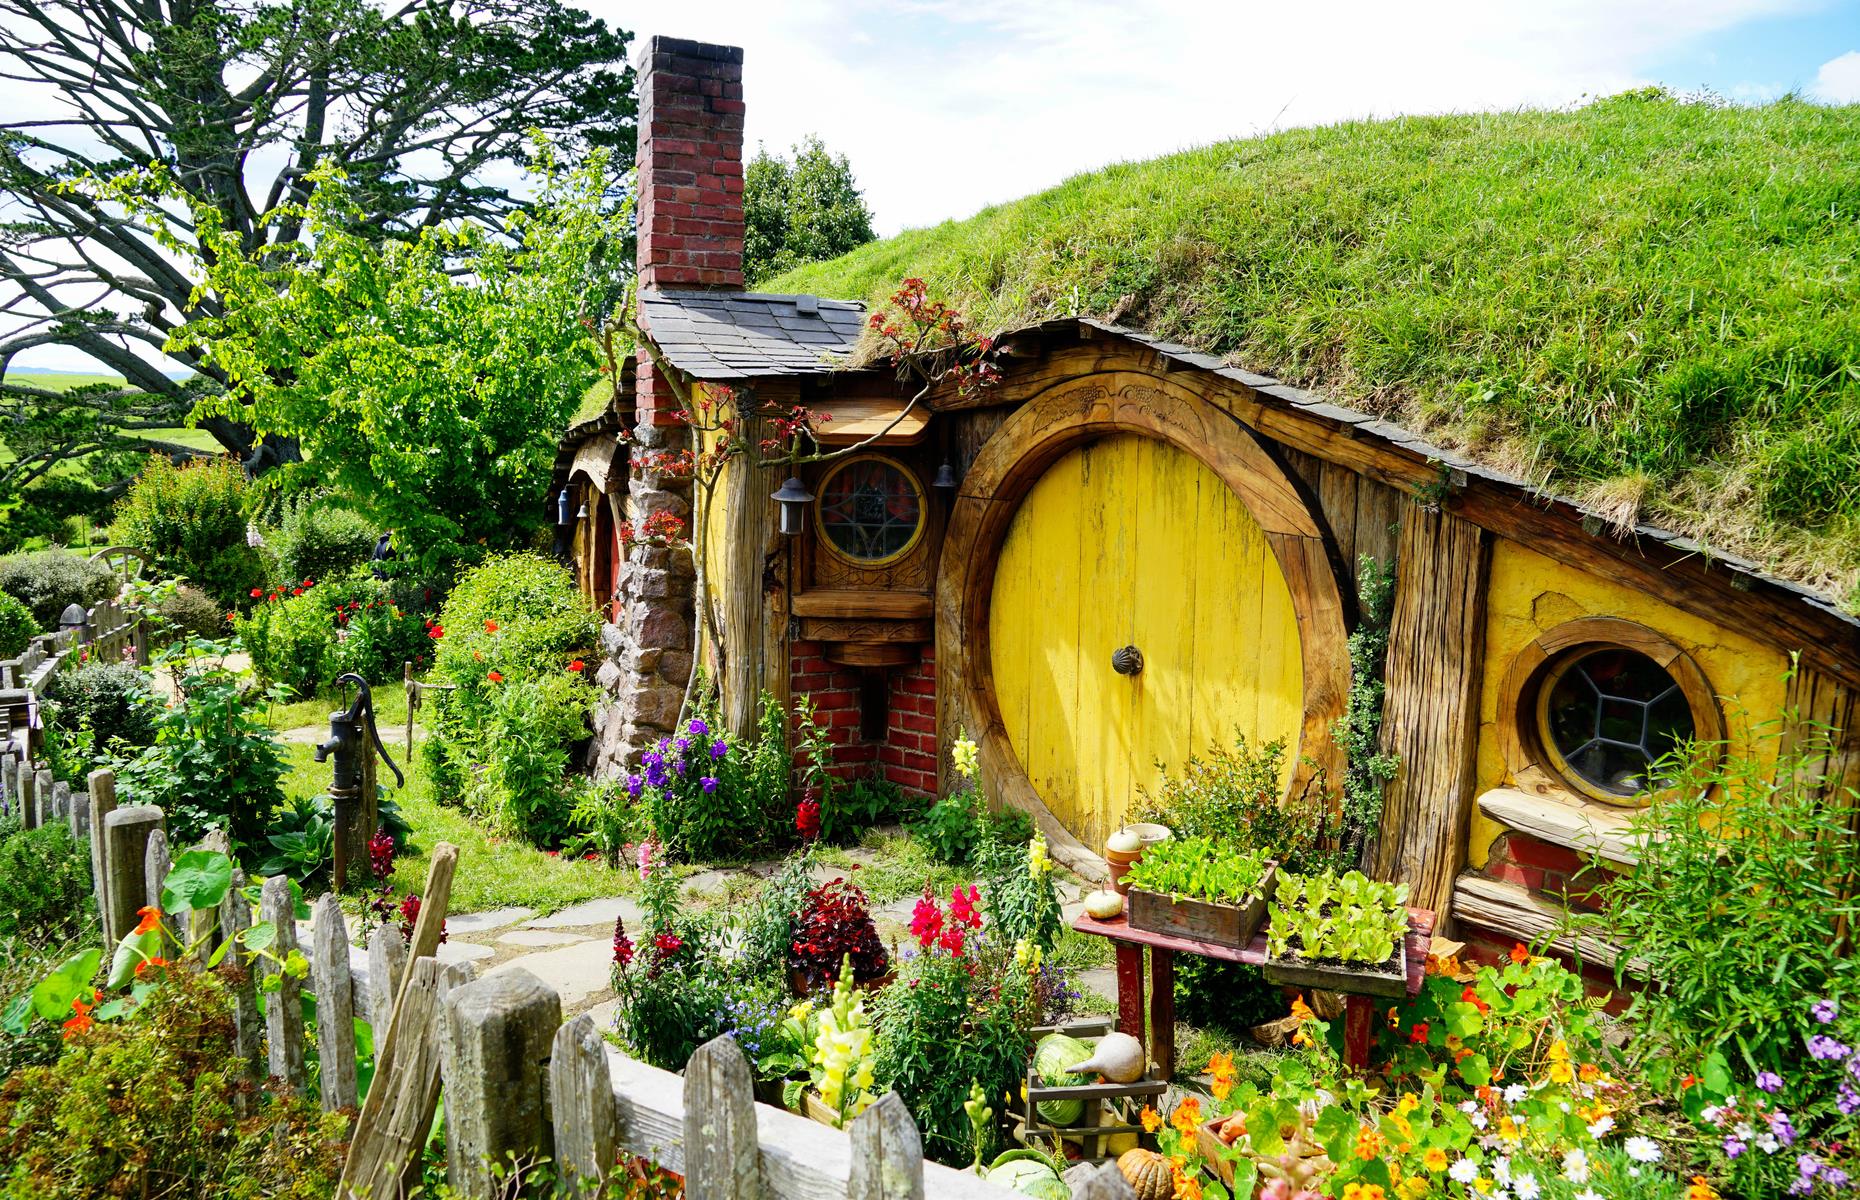 <p>Kiwi film director Sir Peter Jackson shot much of <em>The Lord of the Rings</em> trilogy on location in the epic landscapes of New Zealand. Hobbiton, however, was built from scratch (and rebuilt for <em>The Hobbit</em>) on farmland just outside the small Waikato town of Matamata. The movie set is now one of the country’s most visited tourist attractions and offers guided tours, dinner feasts, special weekend breakfast experiences and more.</p>